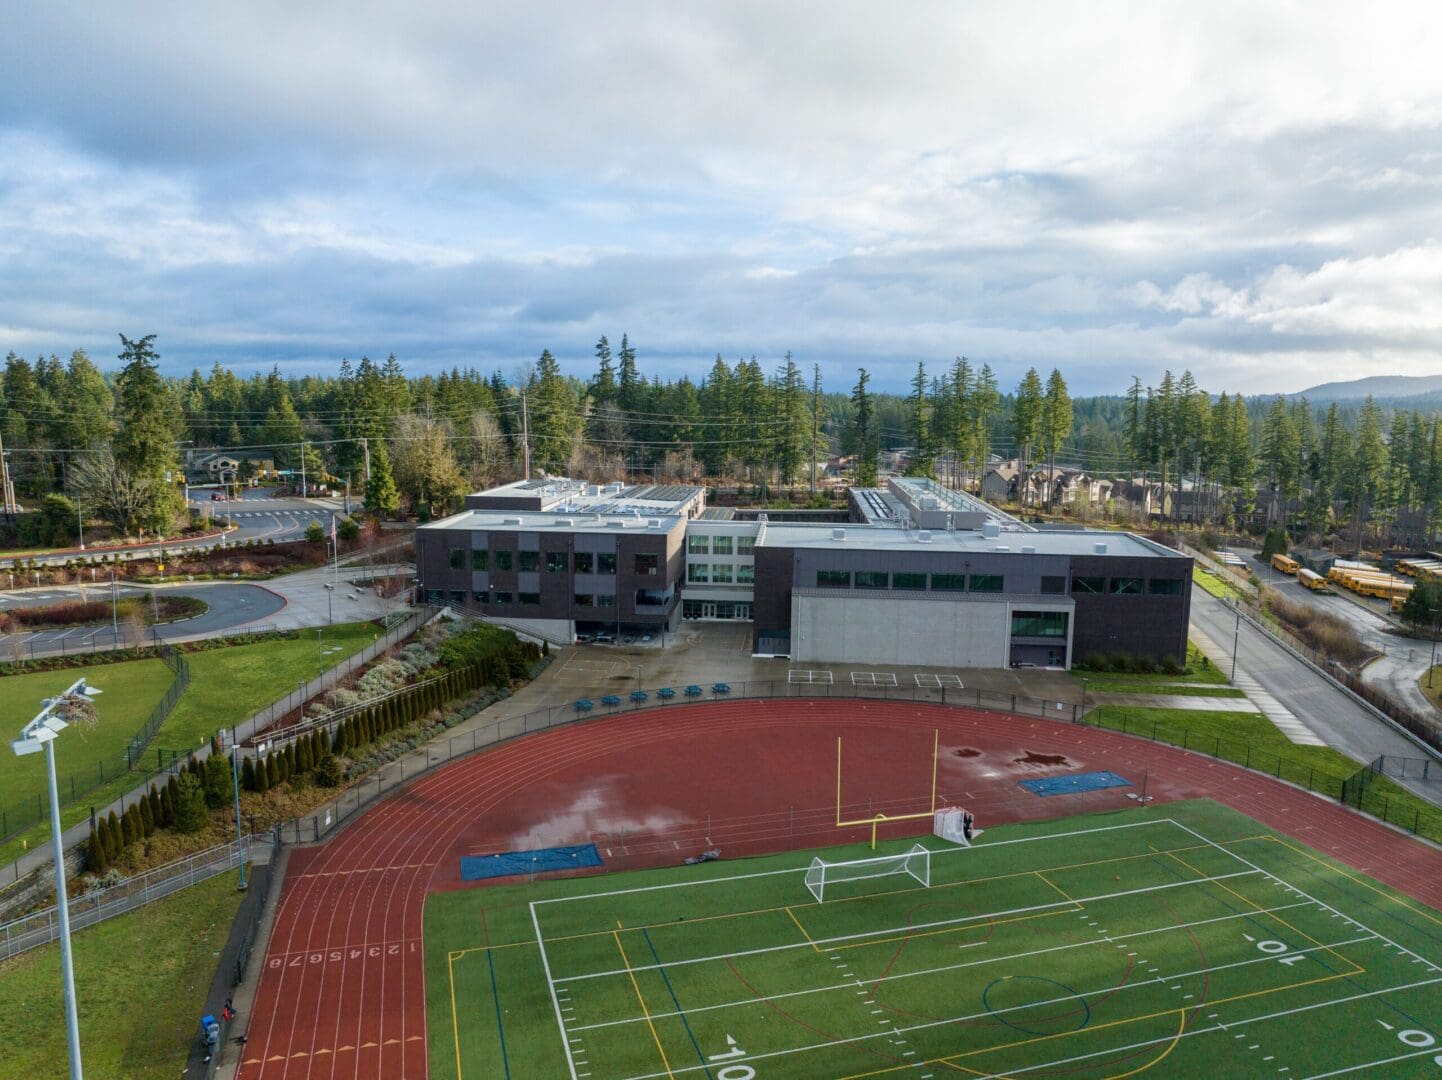 An aerial view of a school with a soccer field.